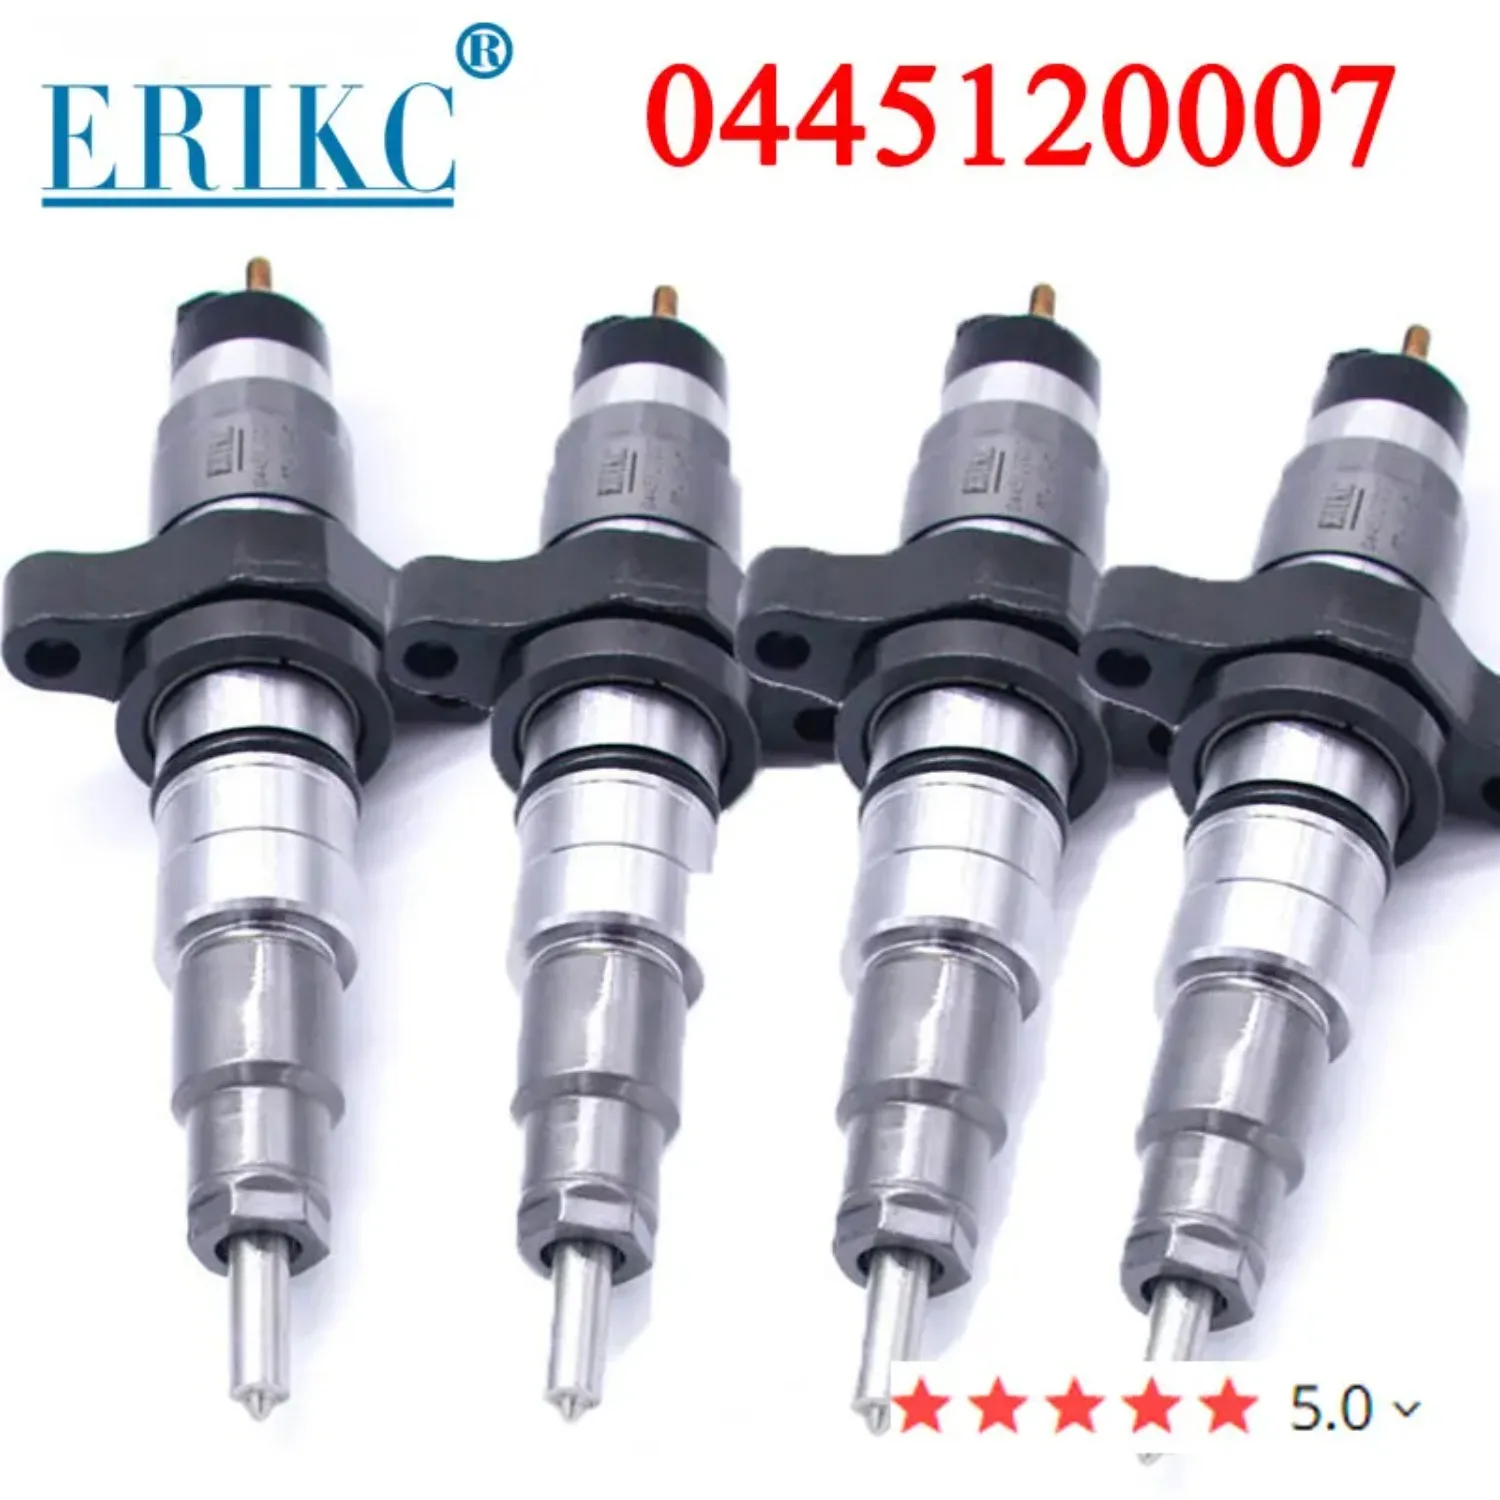 

4PC 0445120007 0986435508 New Diesel Fuel Injector for Bosch Agrale-Deutz MA 12.0 E-Troni Cummins Ford IVECO 0 445 120 007